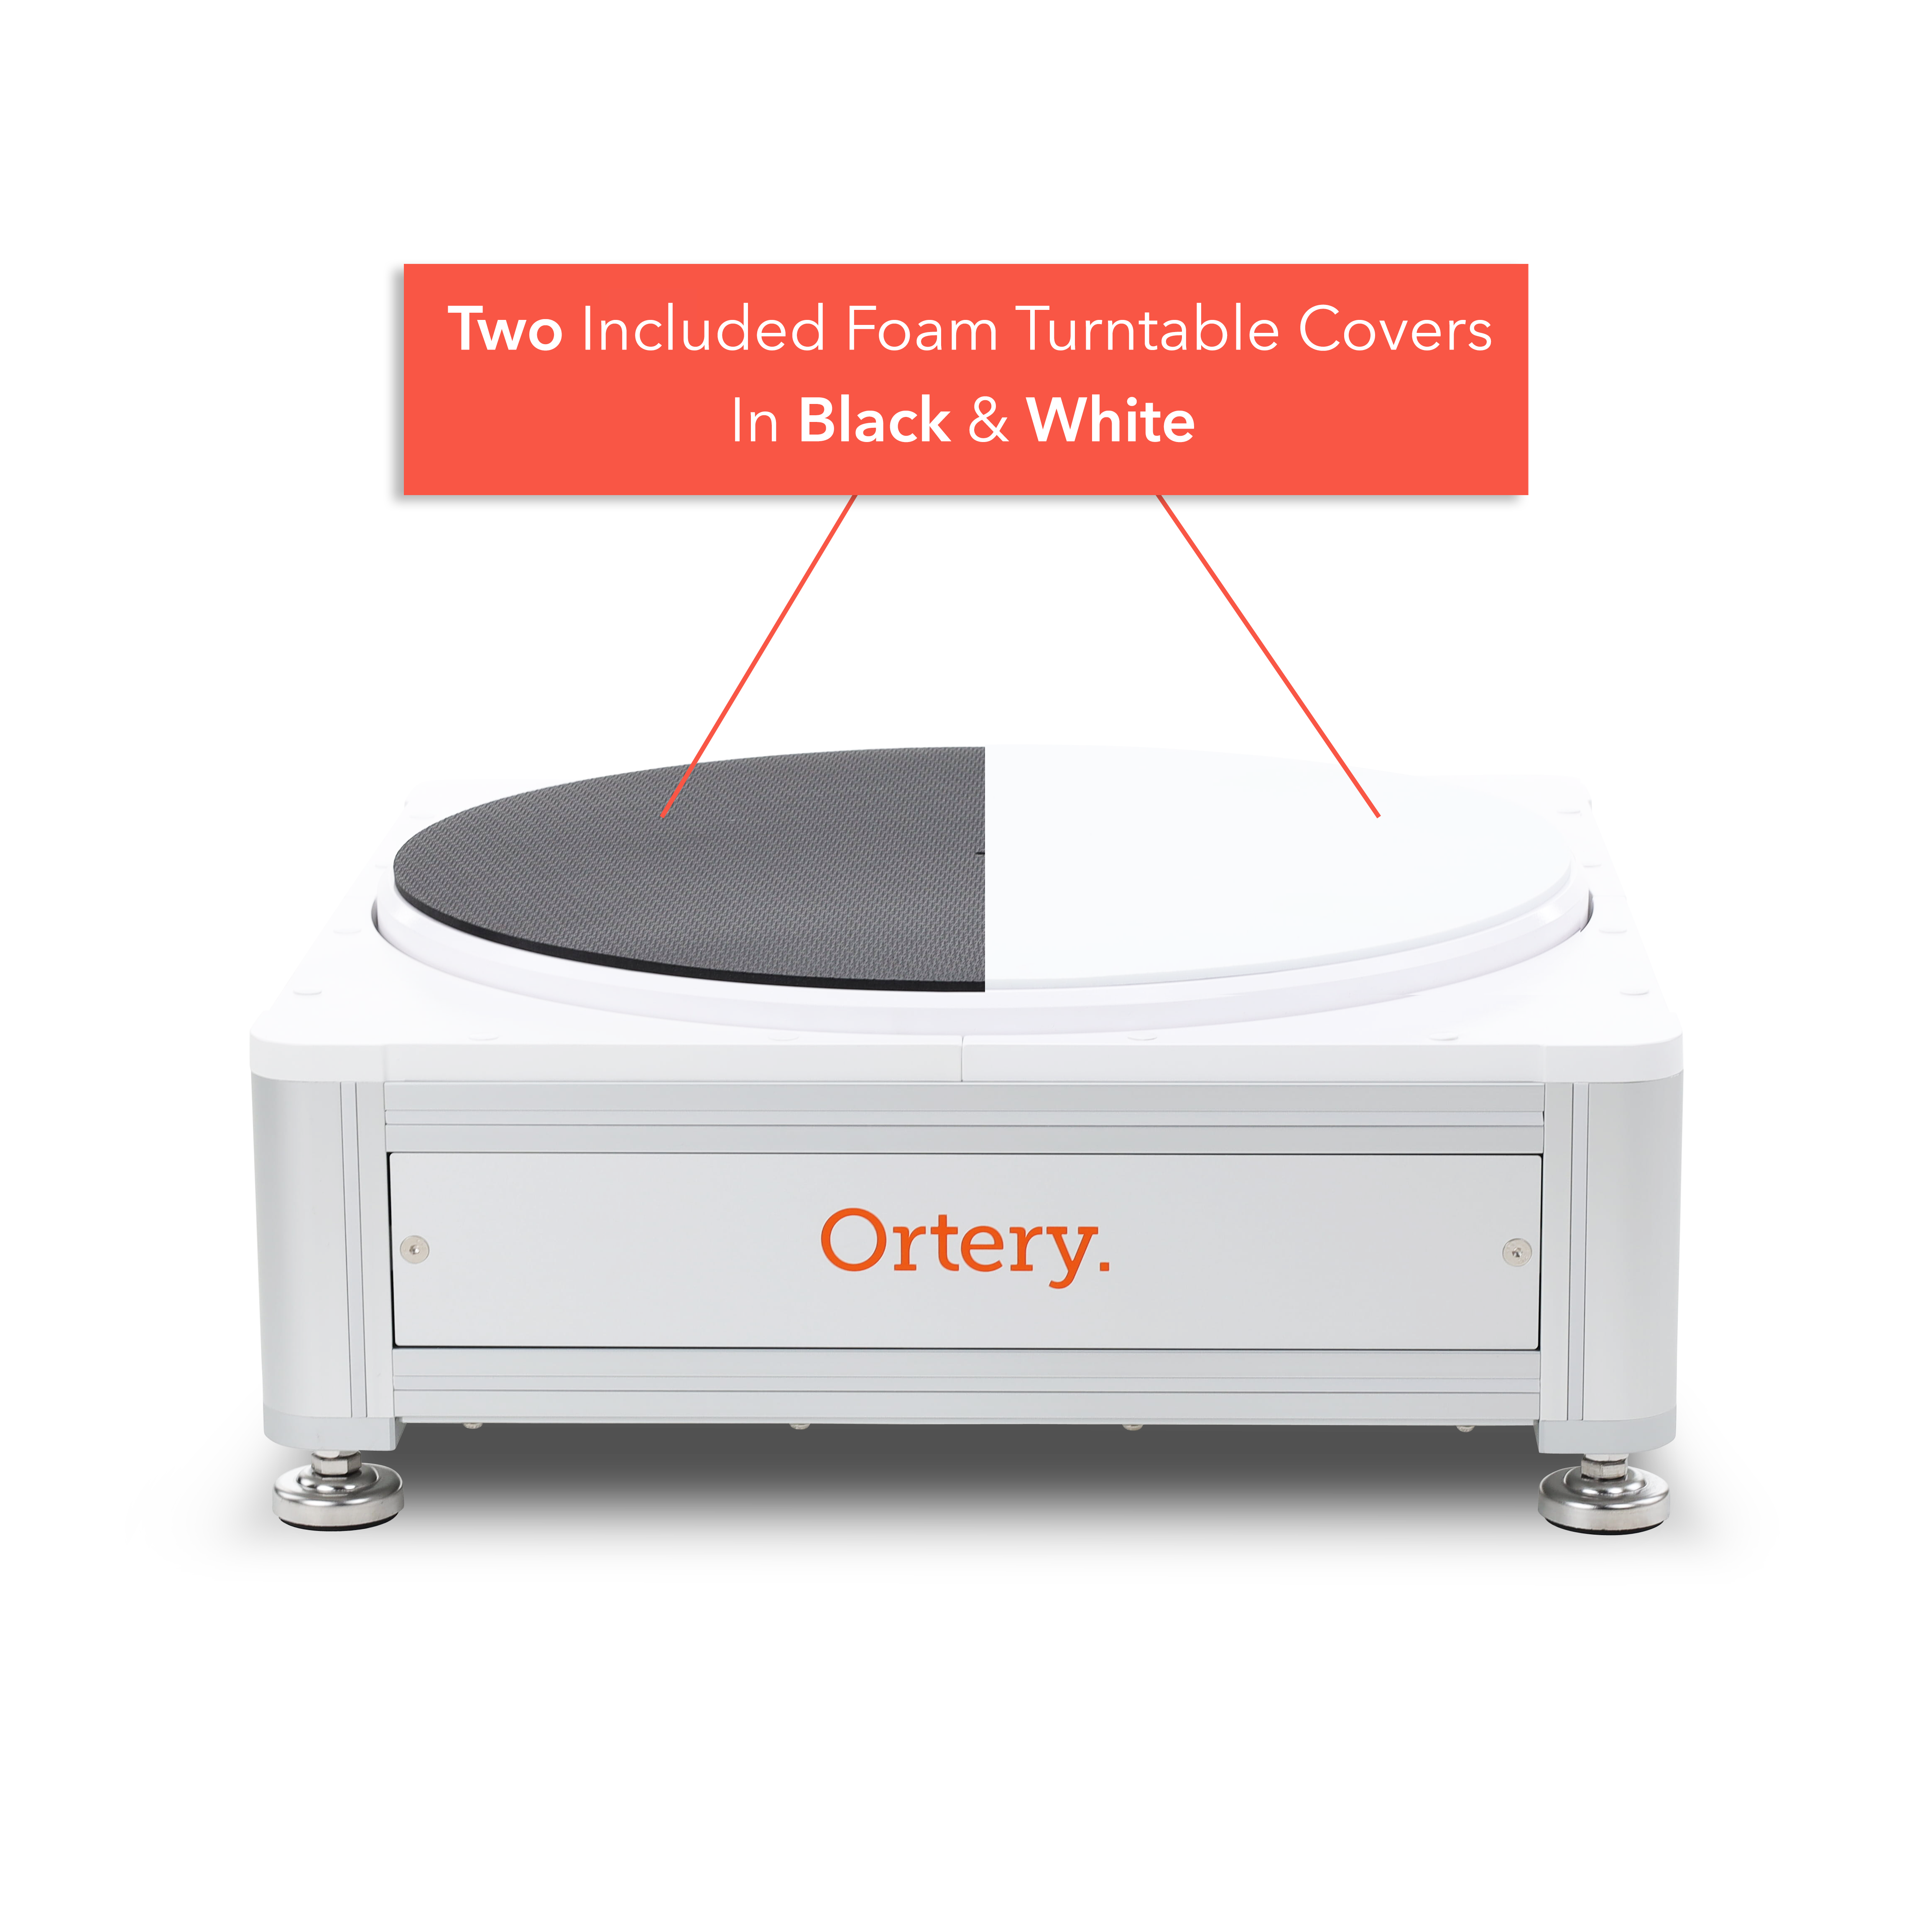 Ortery PhotoCapture 360 Turntable for Product Photography, 25 lbs Capacity